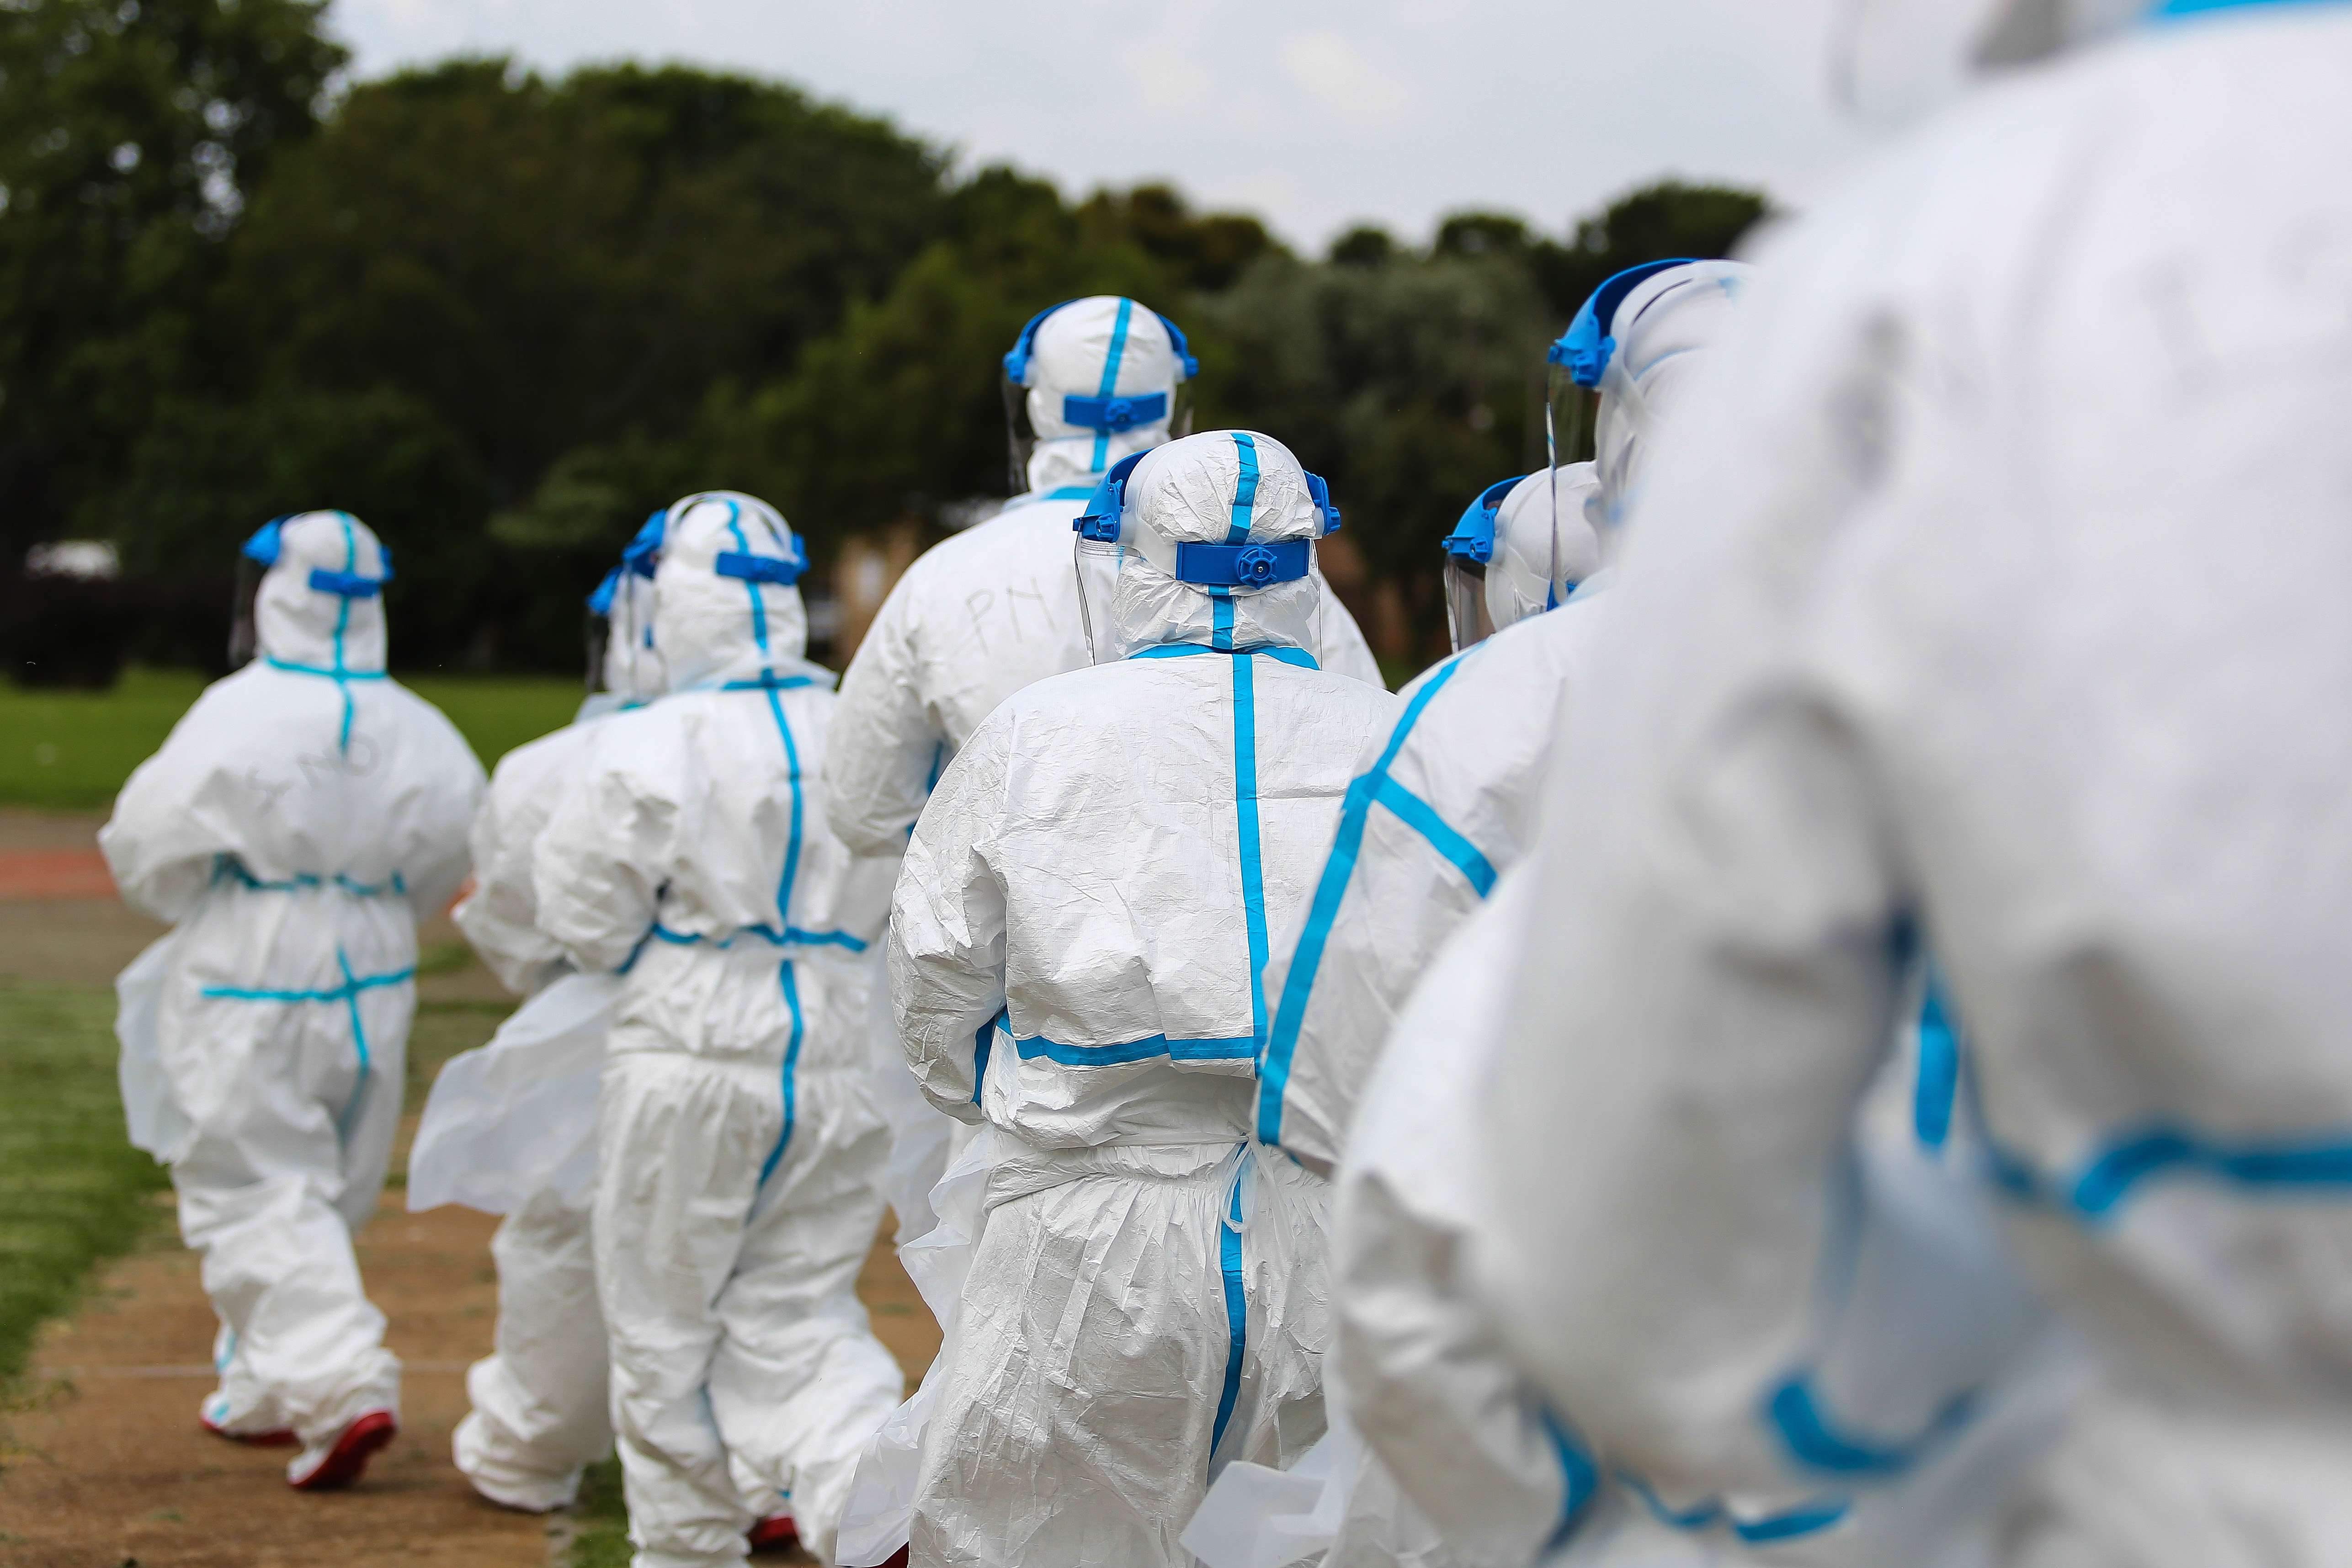 South Africa Sends Help to Fight Ebola in Sierra Leone